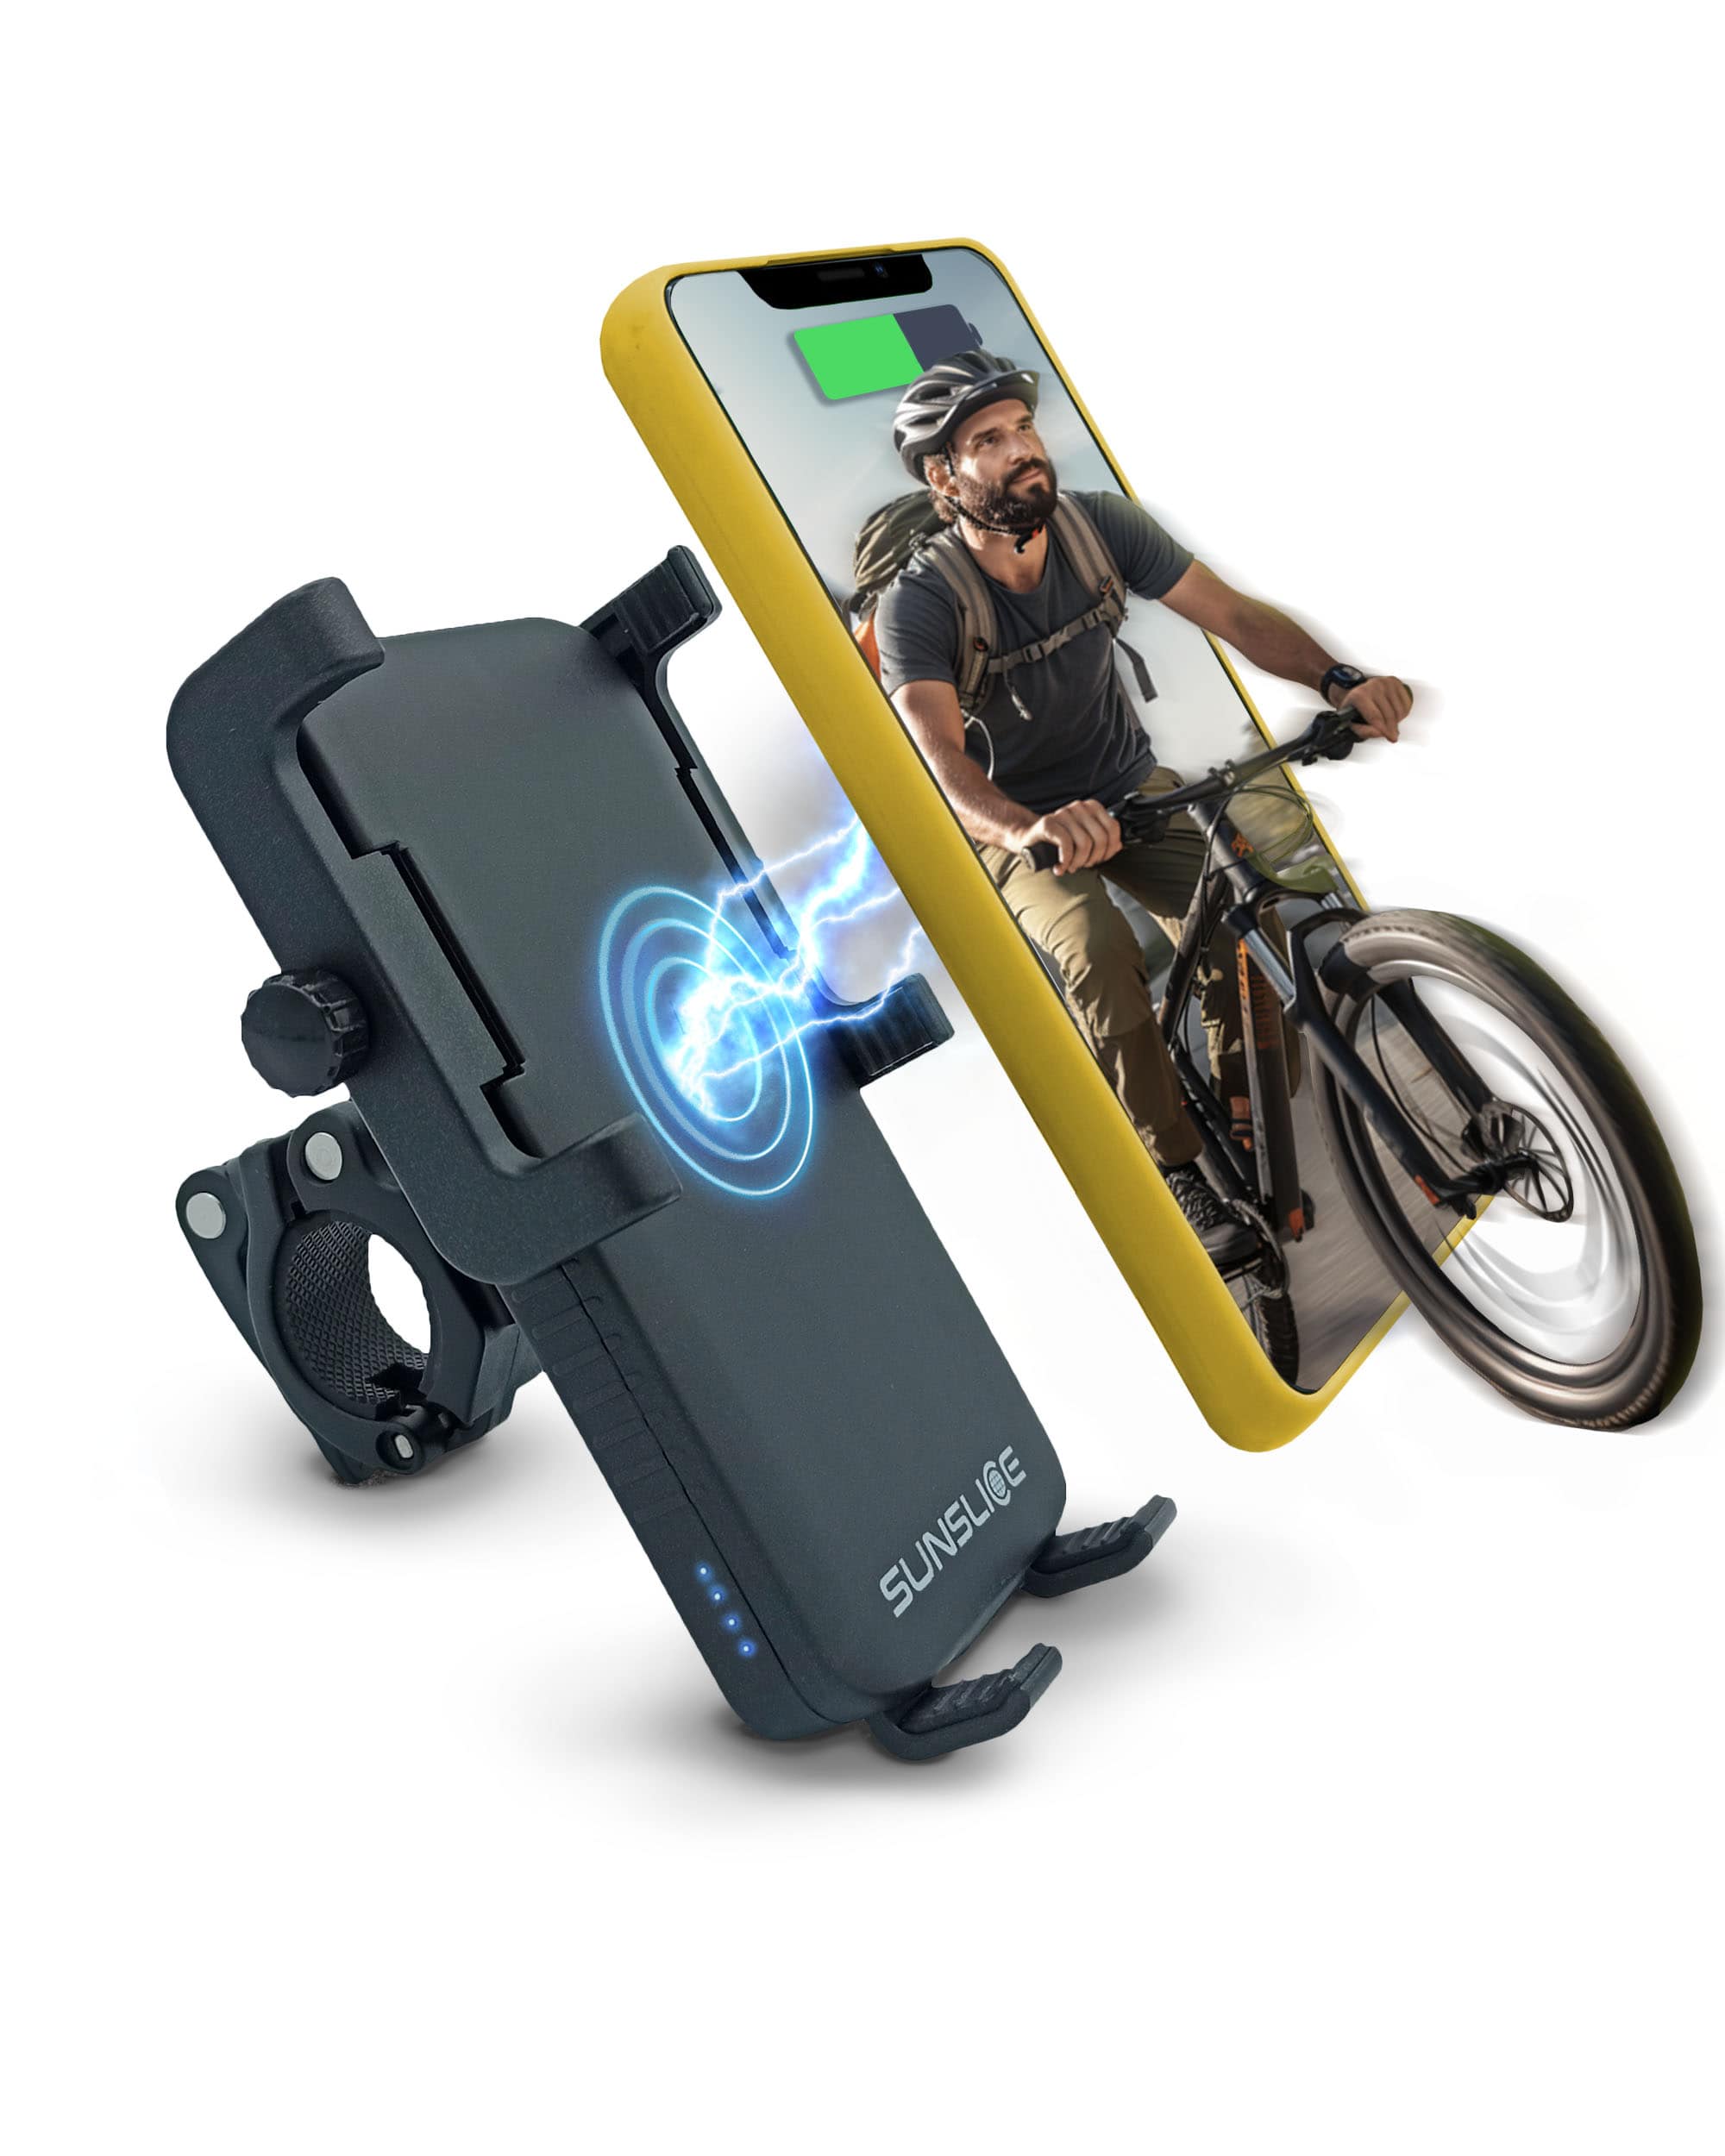 smartphone on a motorcycle phone charger